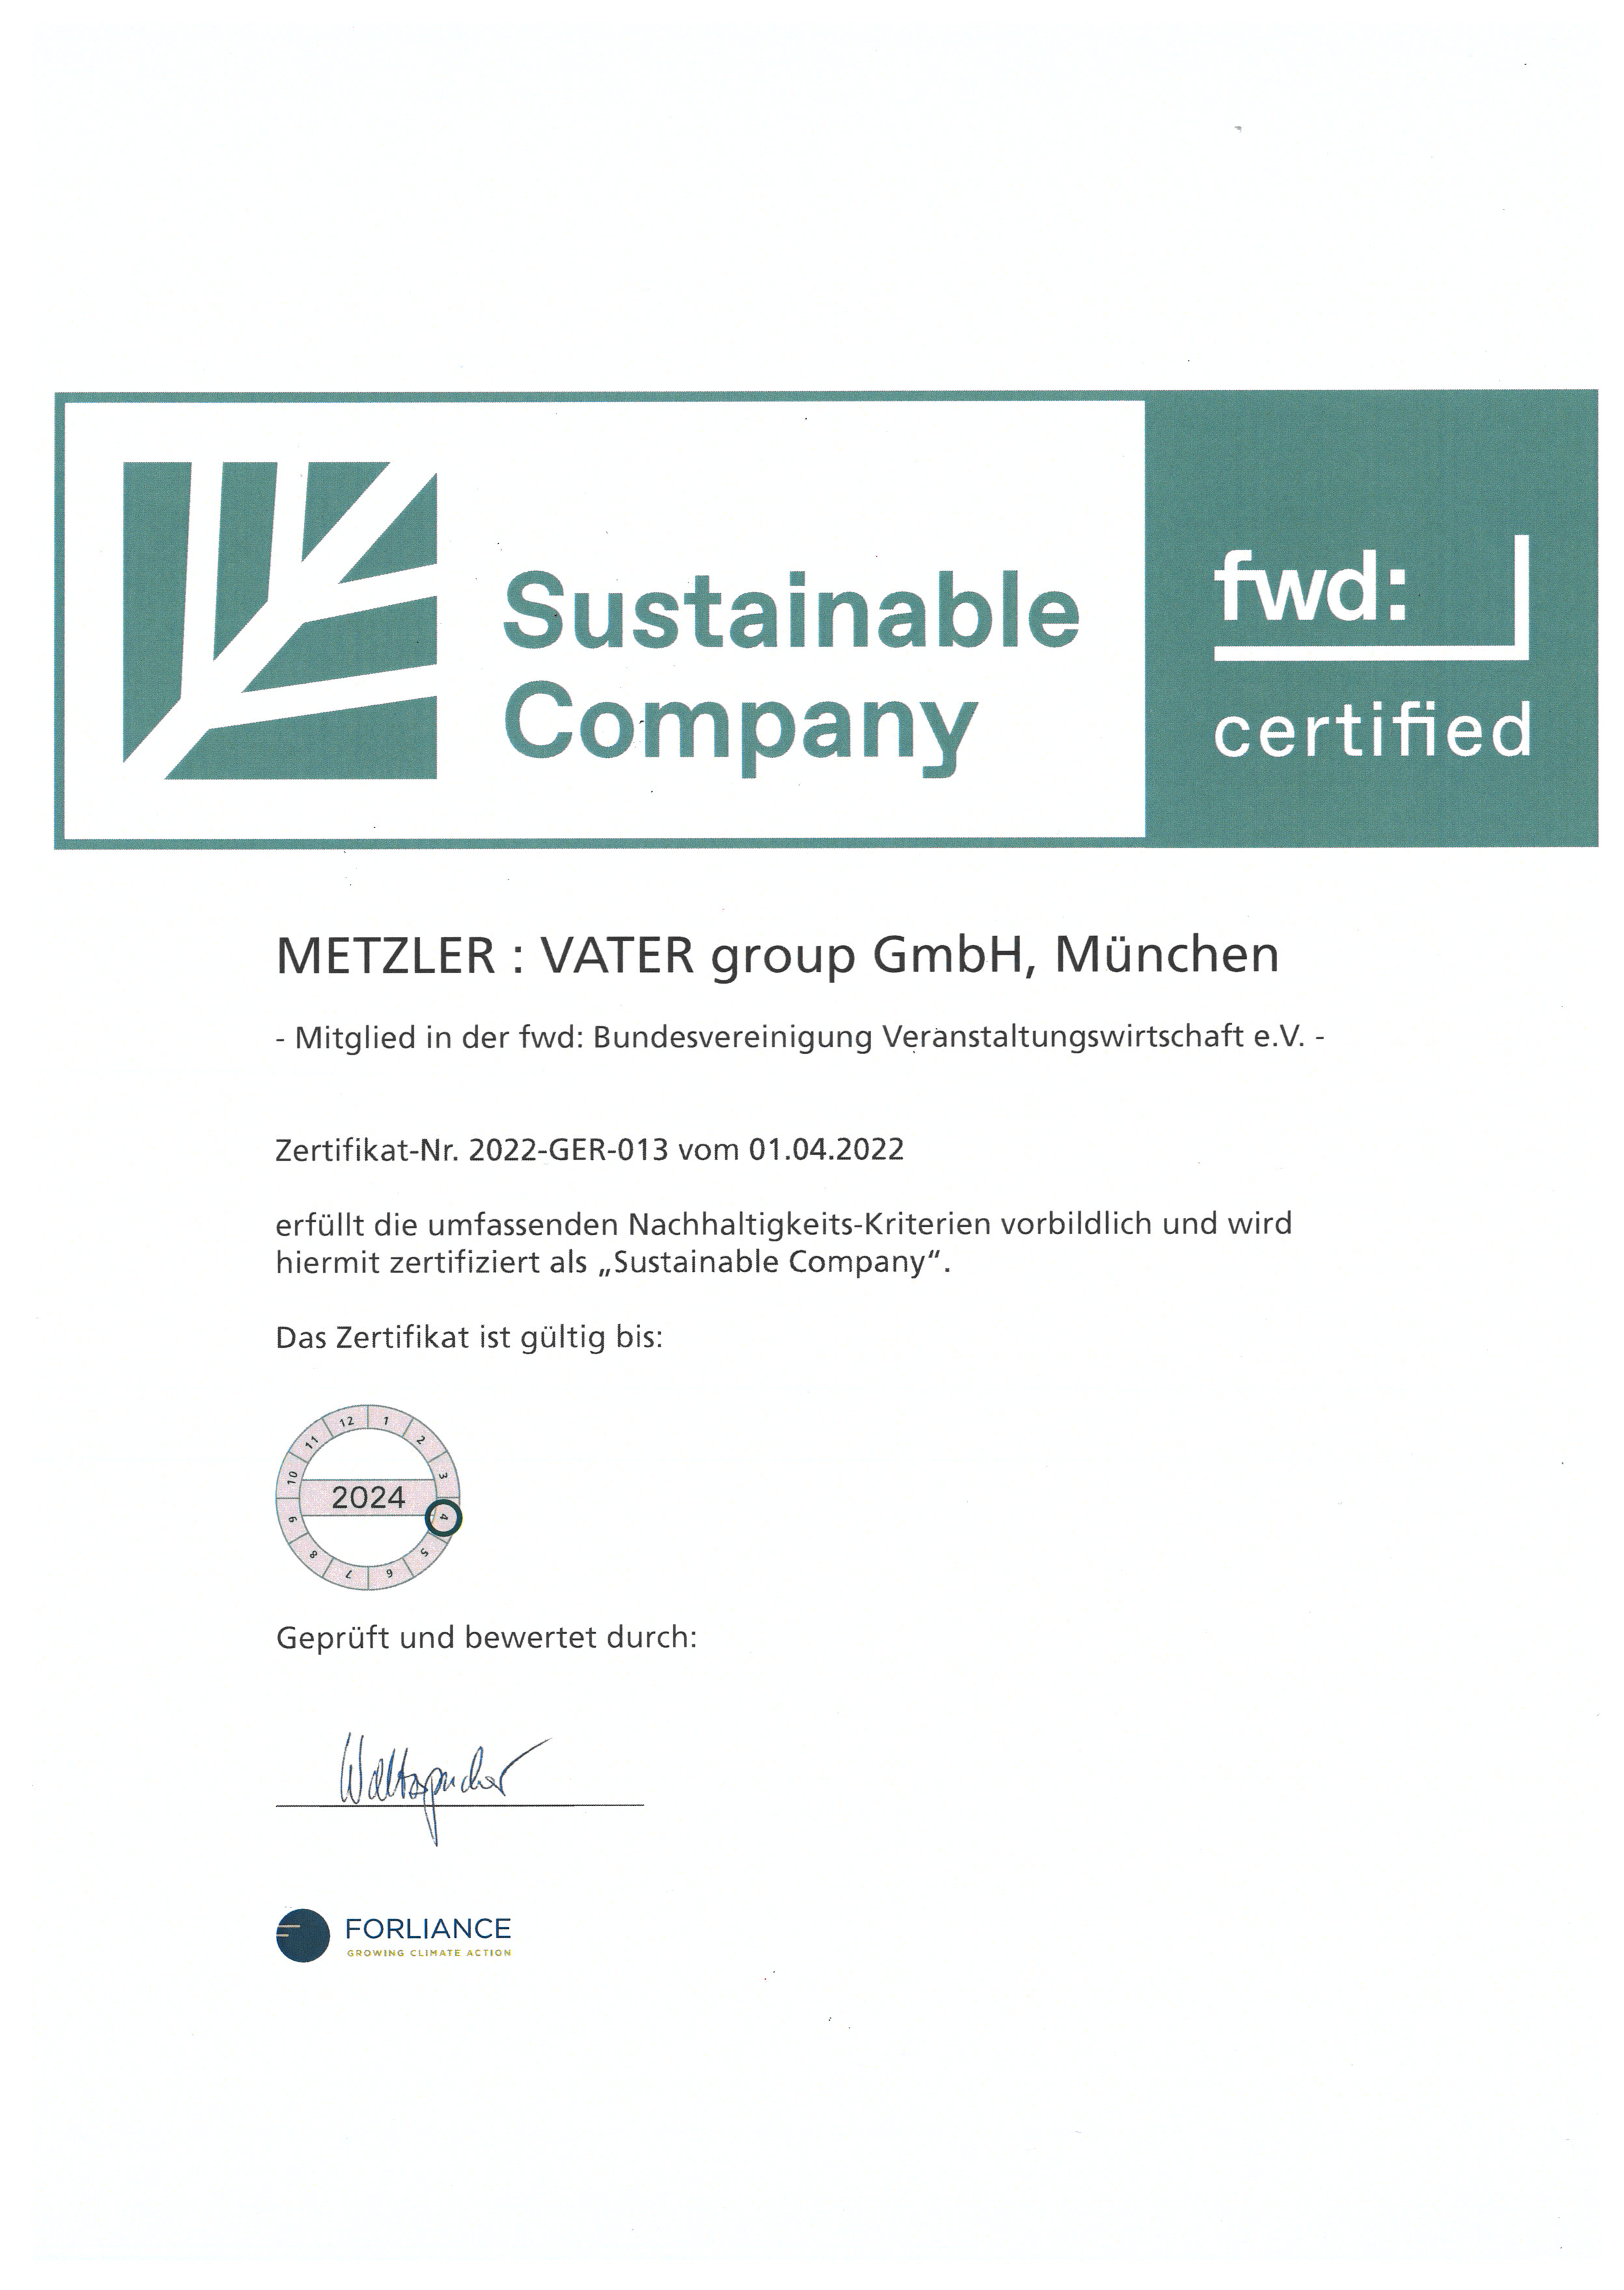 fwd: - Sustainable Company Certification METZLER VATER